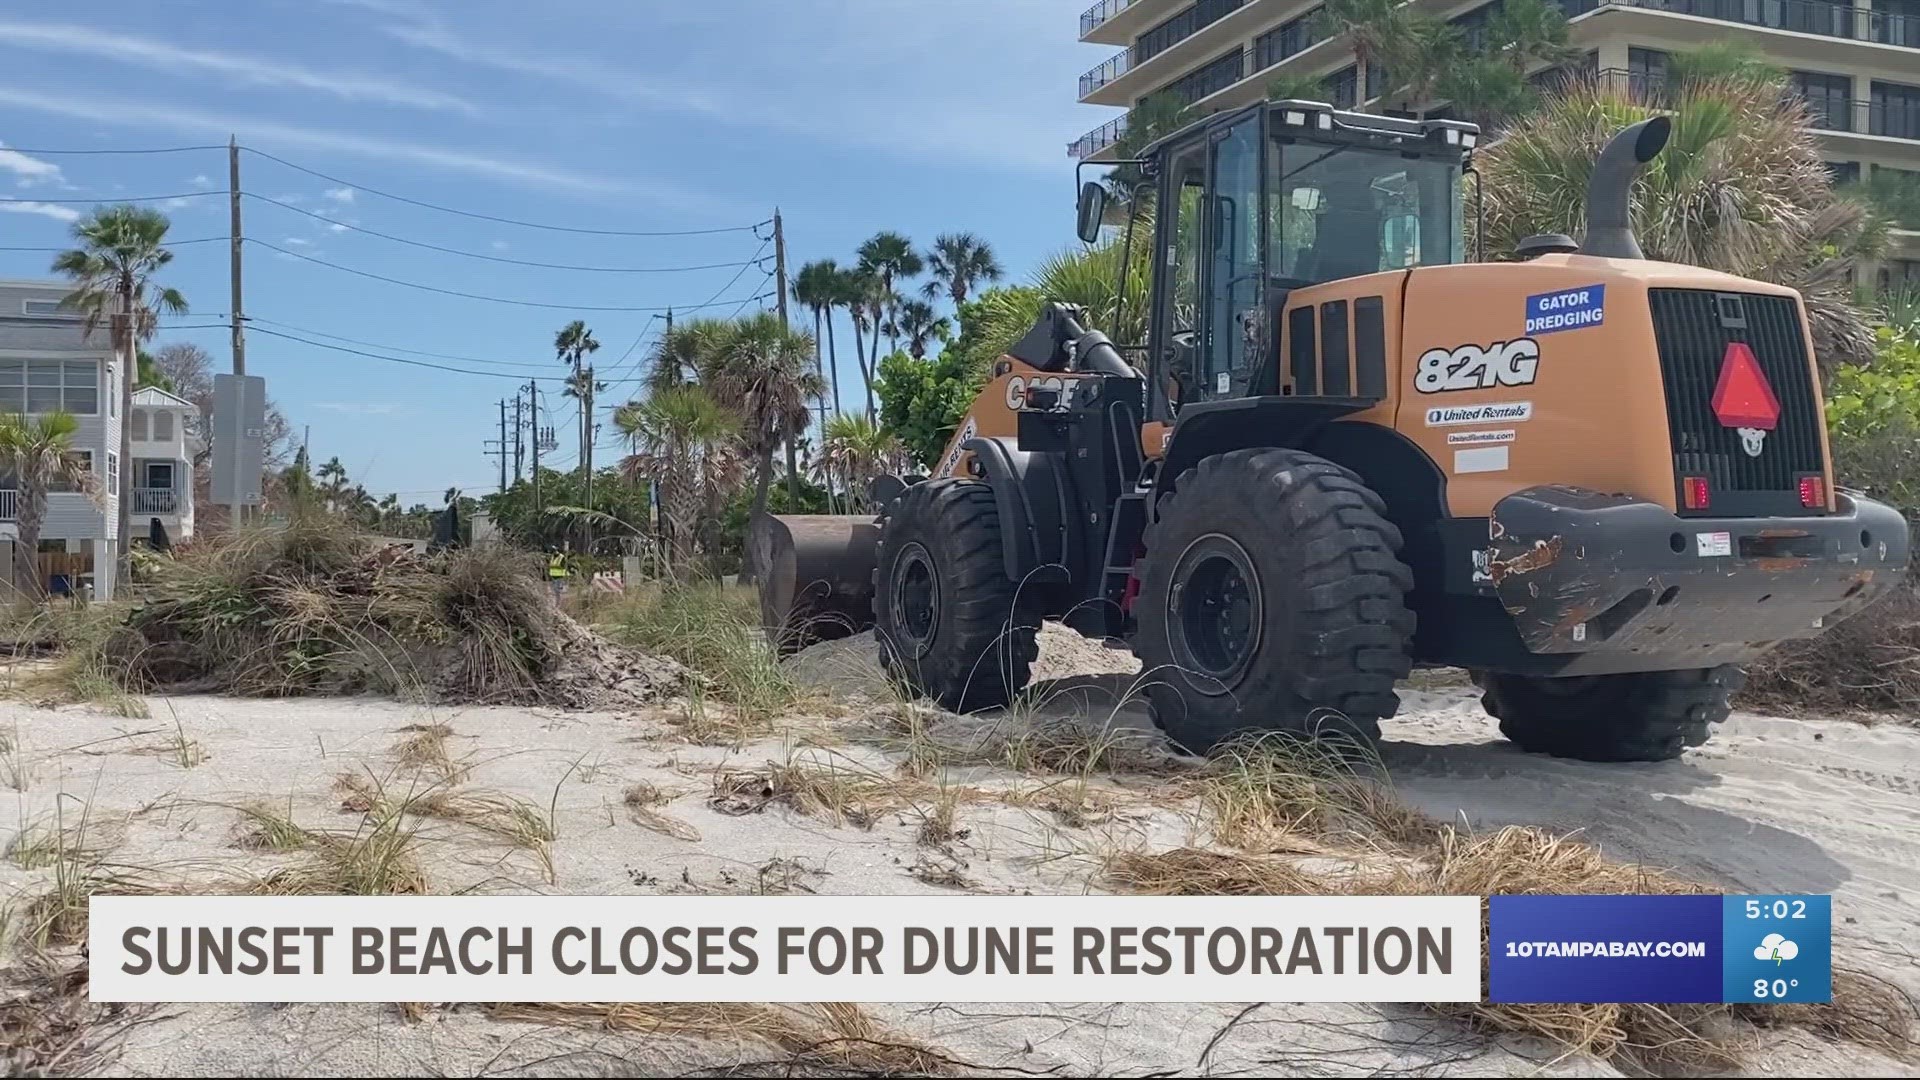 City officials will be bringing in truckloads of sand to replace the damage done by Hurricane Idalia.